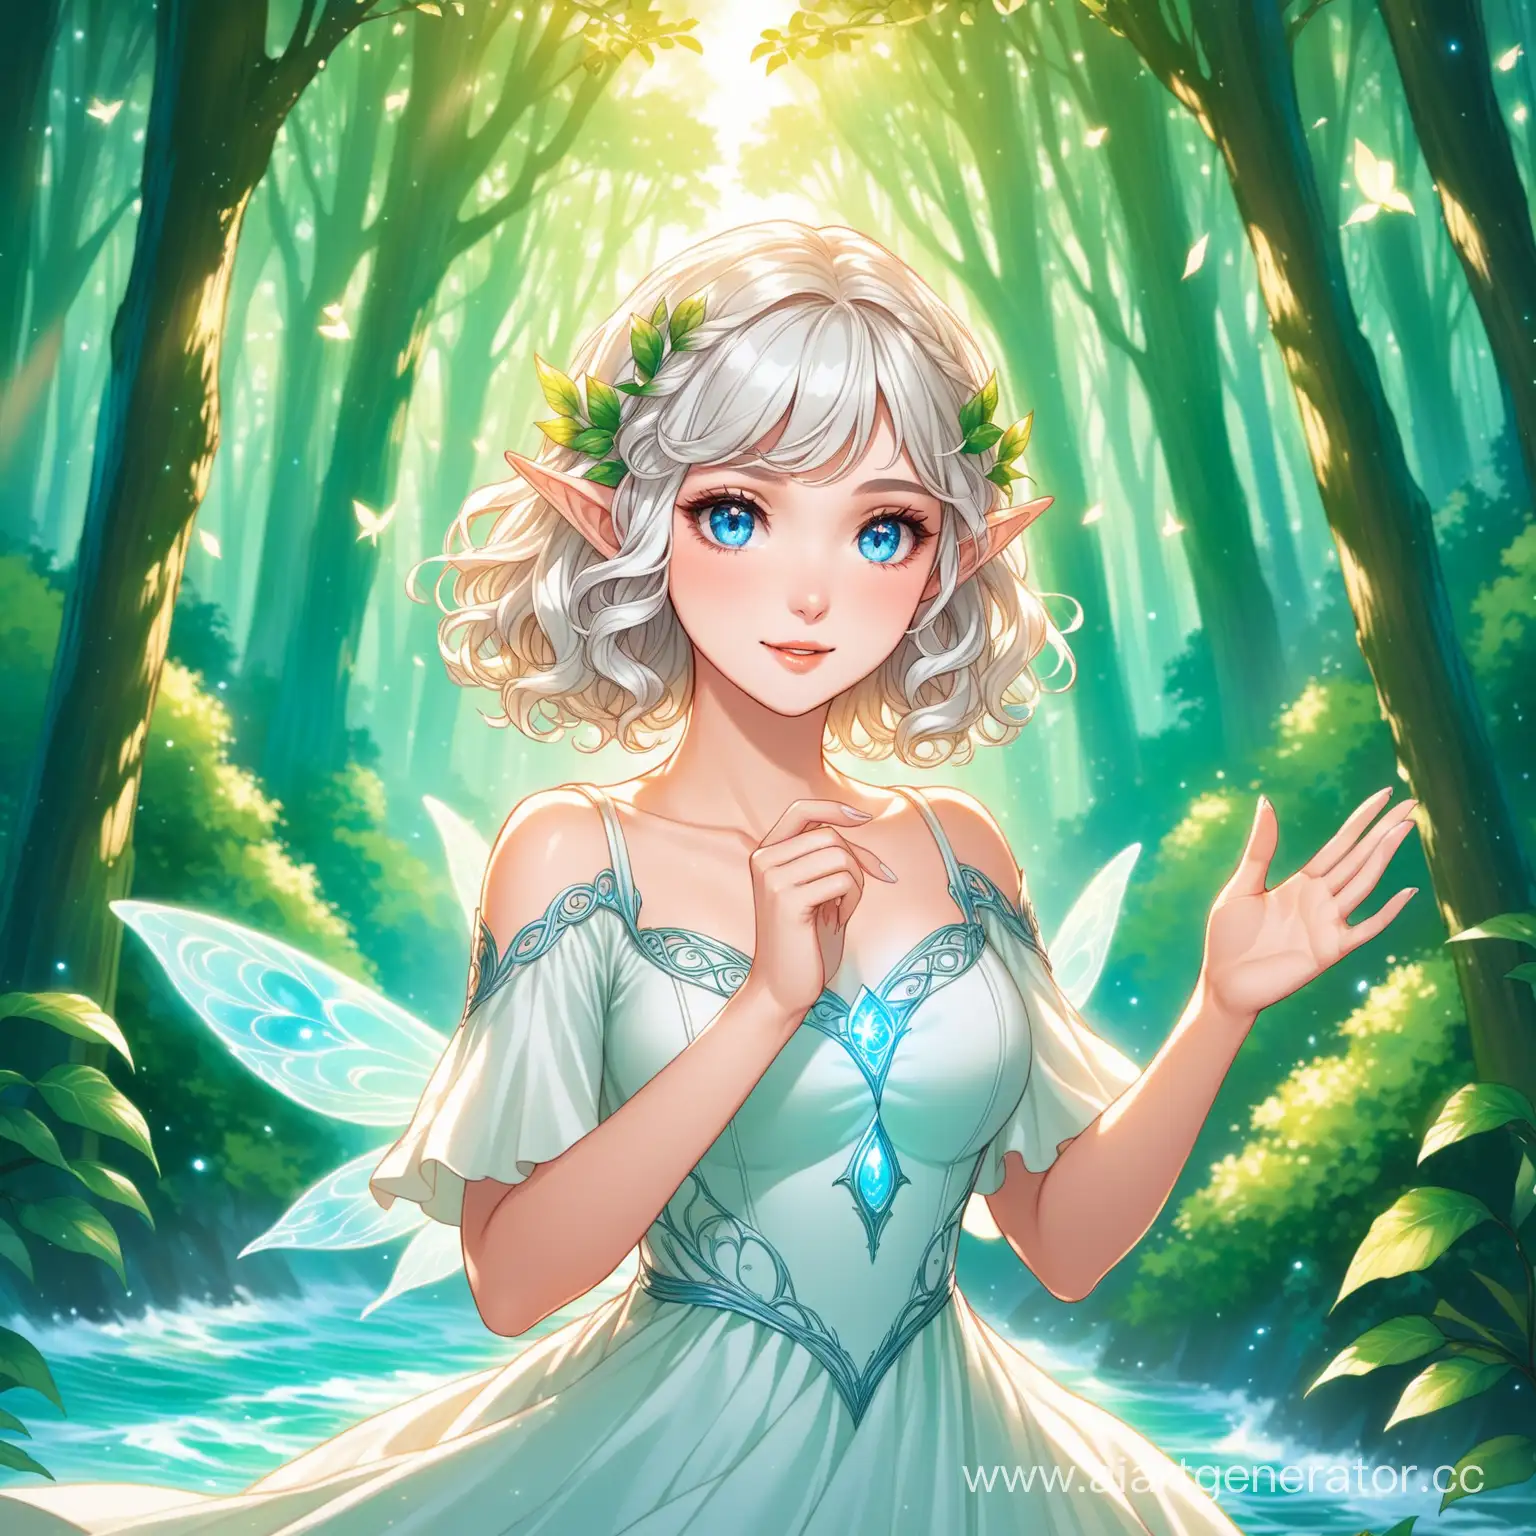 Elvish-Girl-in-White-Dress-Waves-Hand-in-Enchanted-Forest